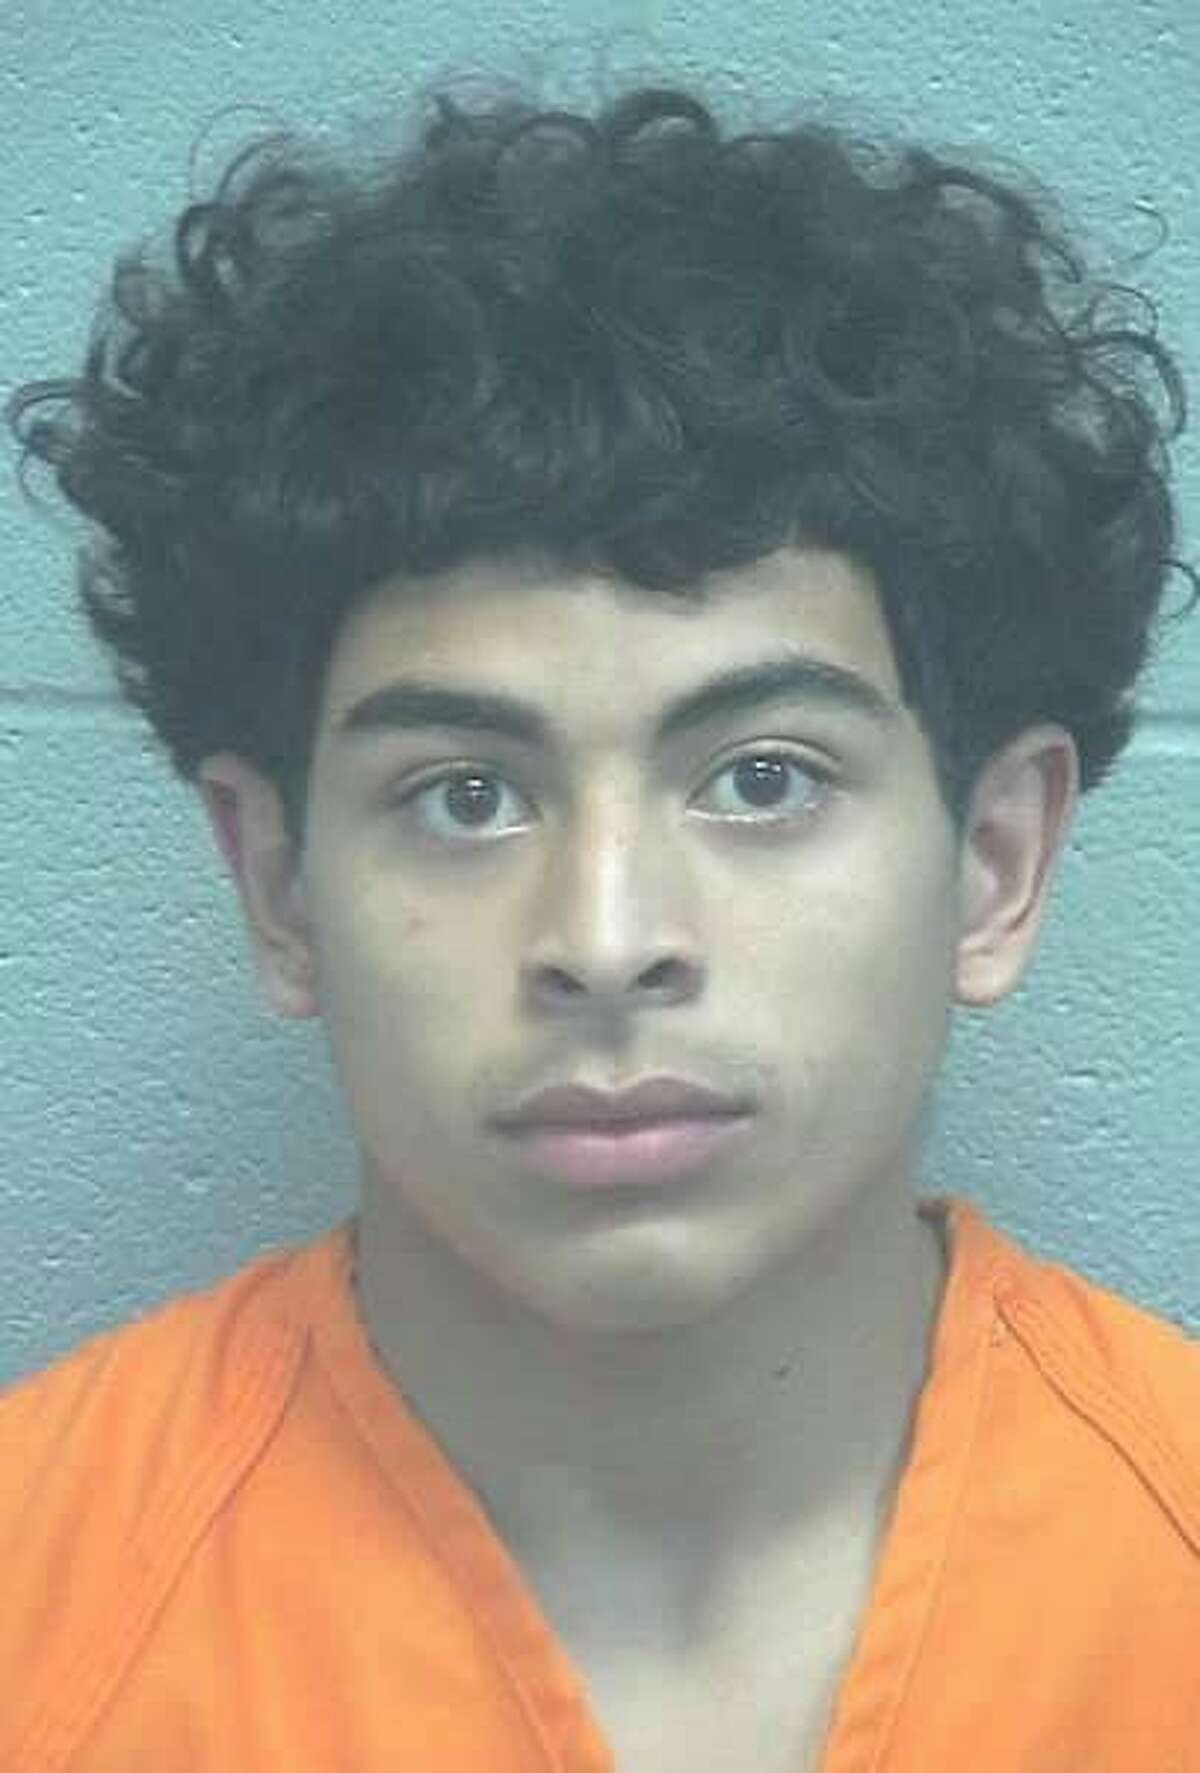 Midland police issued an arrest warrant for 17-year-old Greg Anthony Barrera III in connection with a fatal shooting that occurred Saturday, May 29, 2021. 